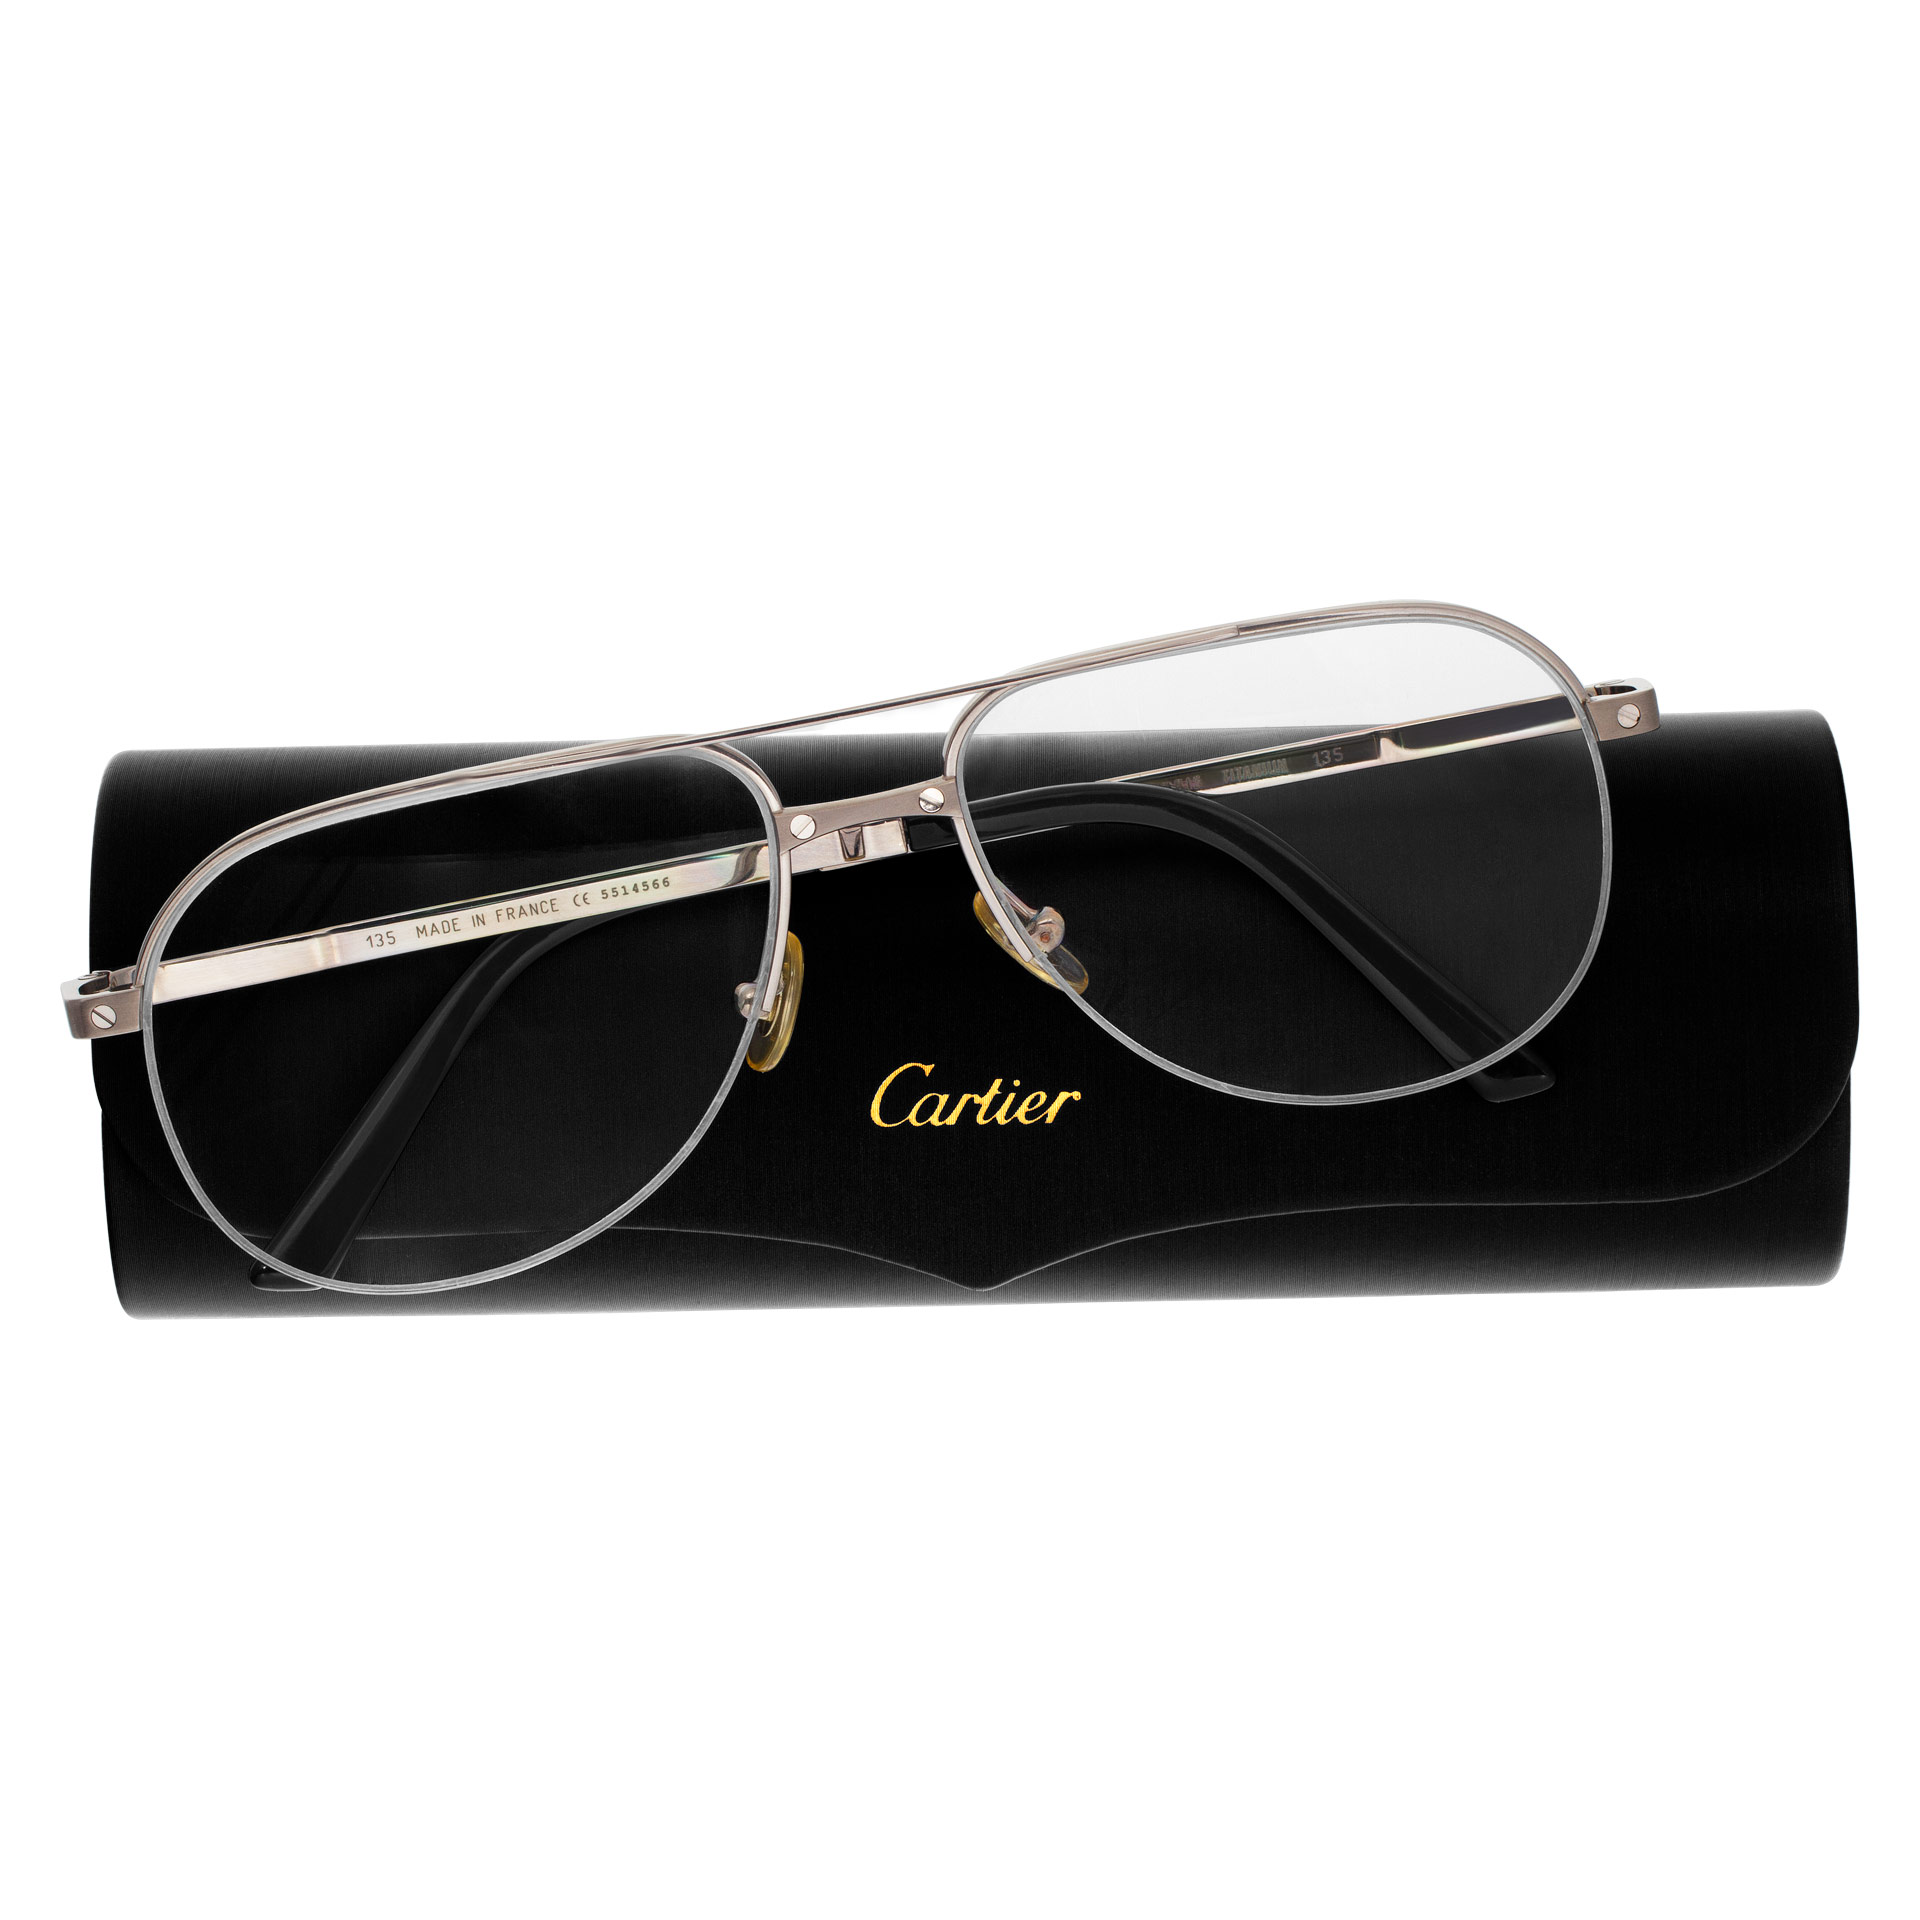 Cartier glasses stainless steel frame image 2